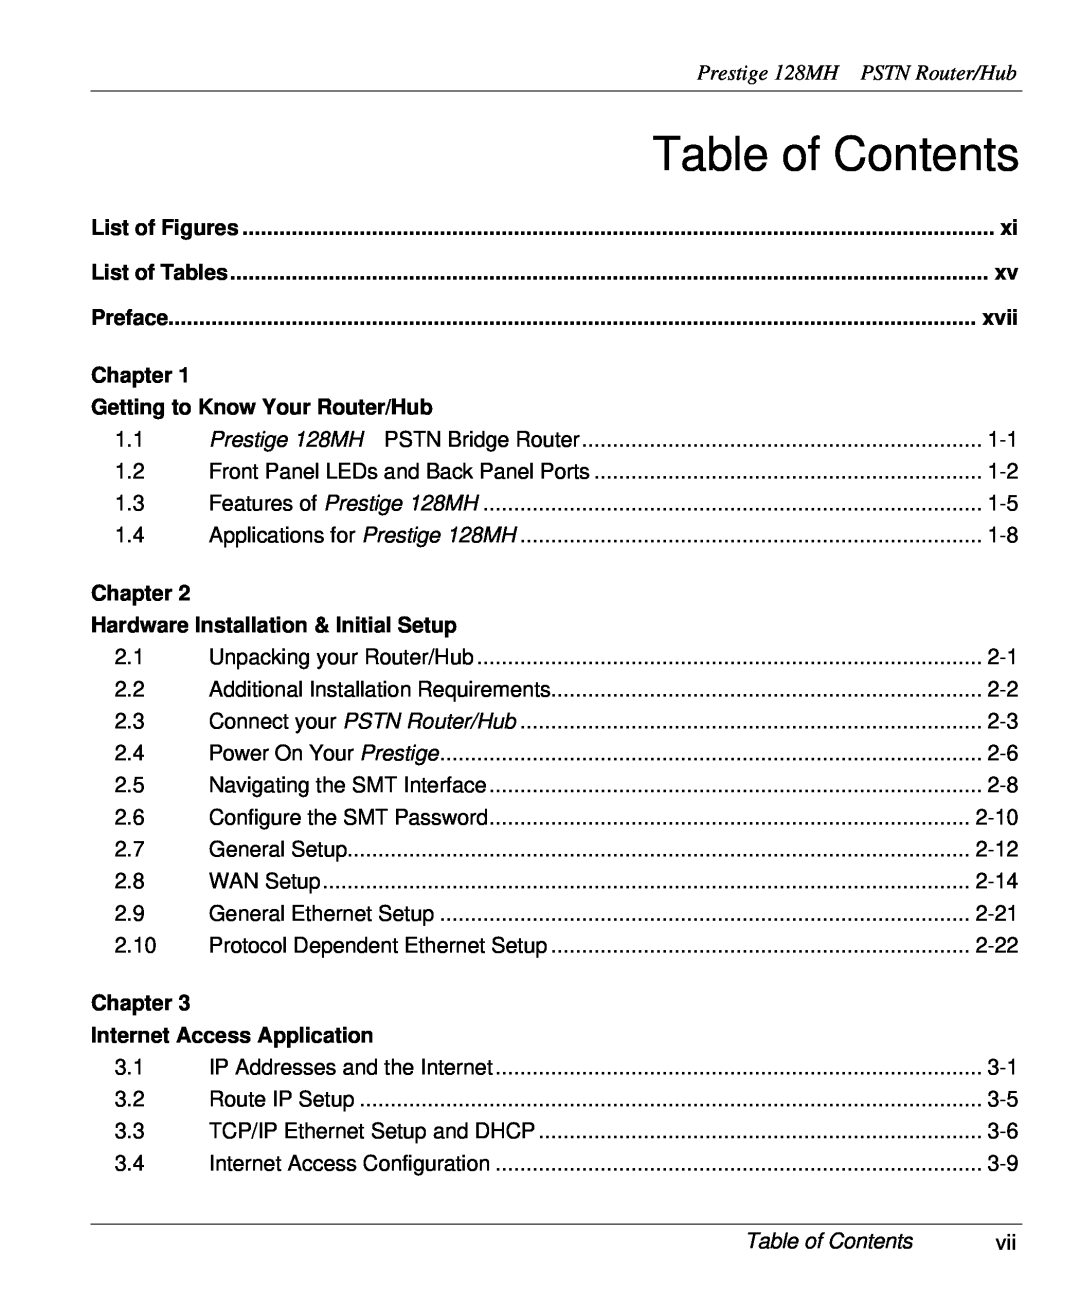 ZyXEL Communications Table of Contents, Prestige 128MH PSTN Router/Hub, xvii, Chapter, Getting to Know Your Router/Hub 